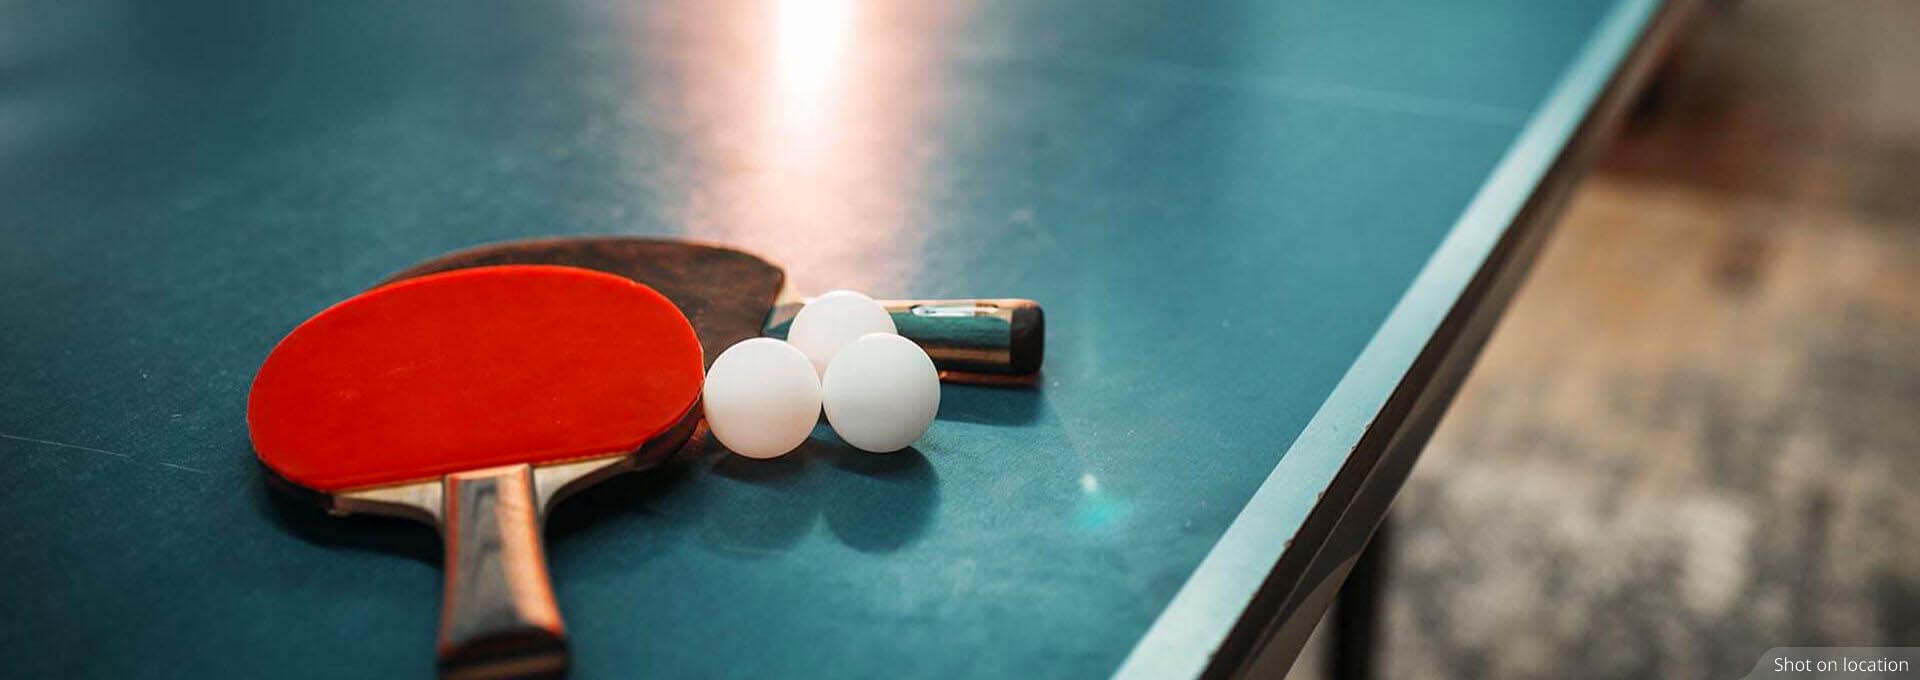 Table tennis court in Cypress by House of Hiranandani in Devanahalli, Bengaluru